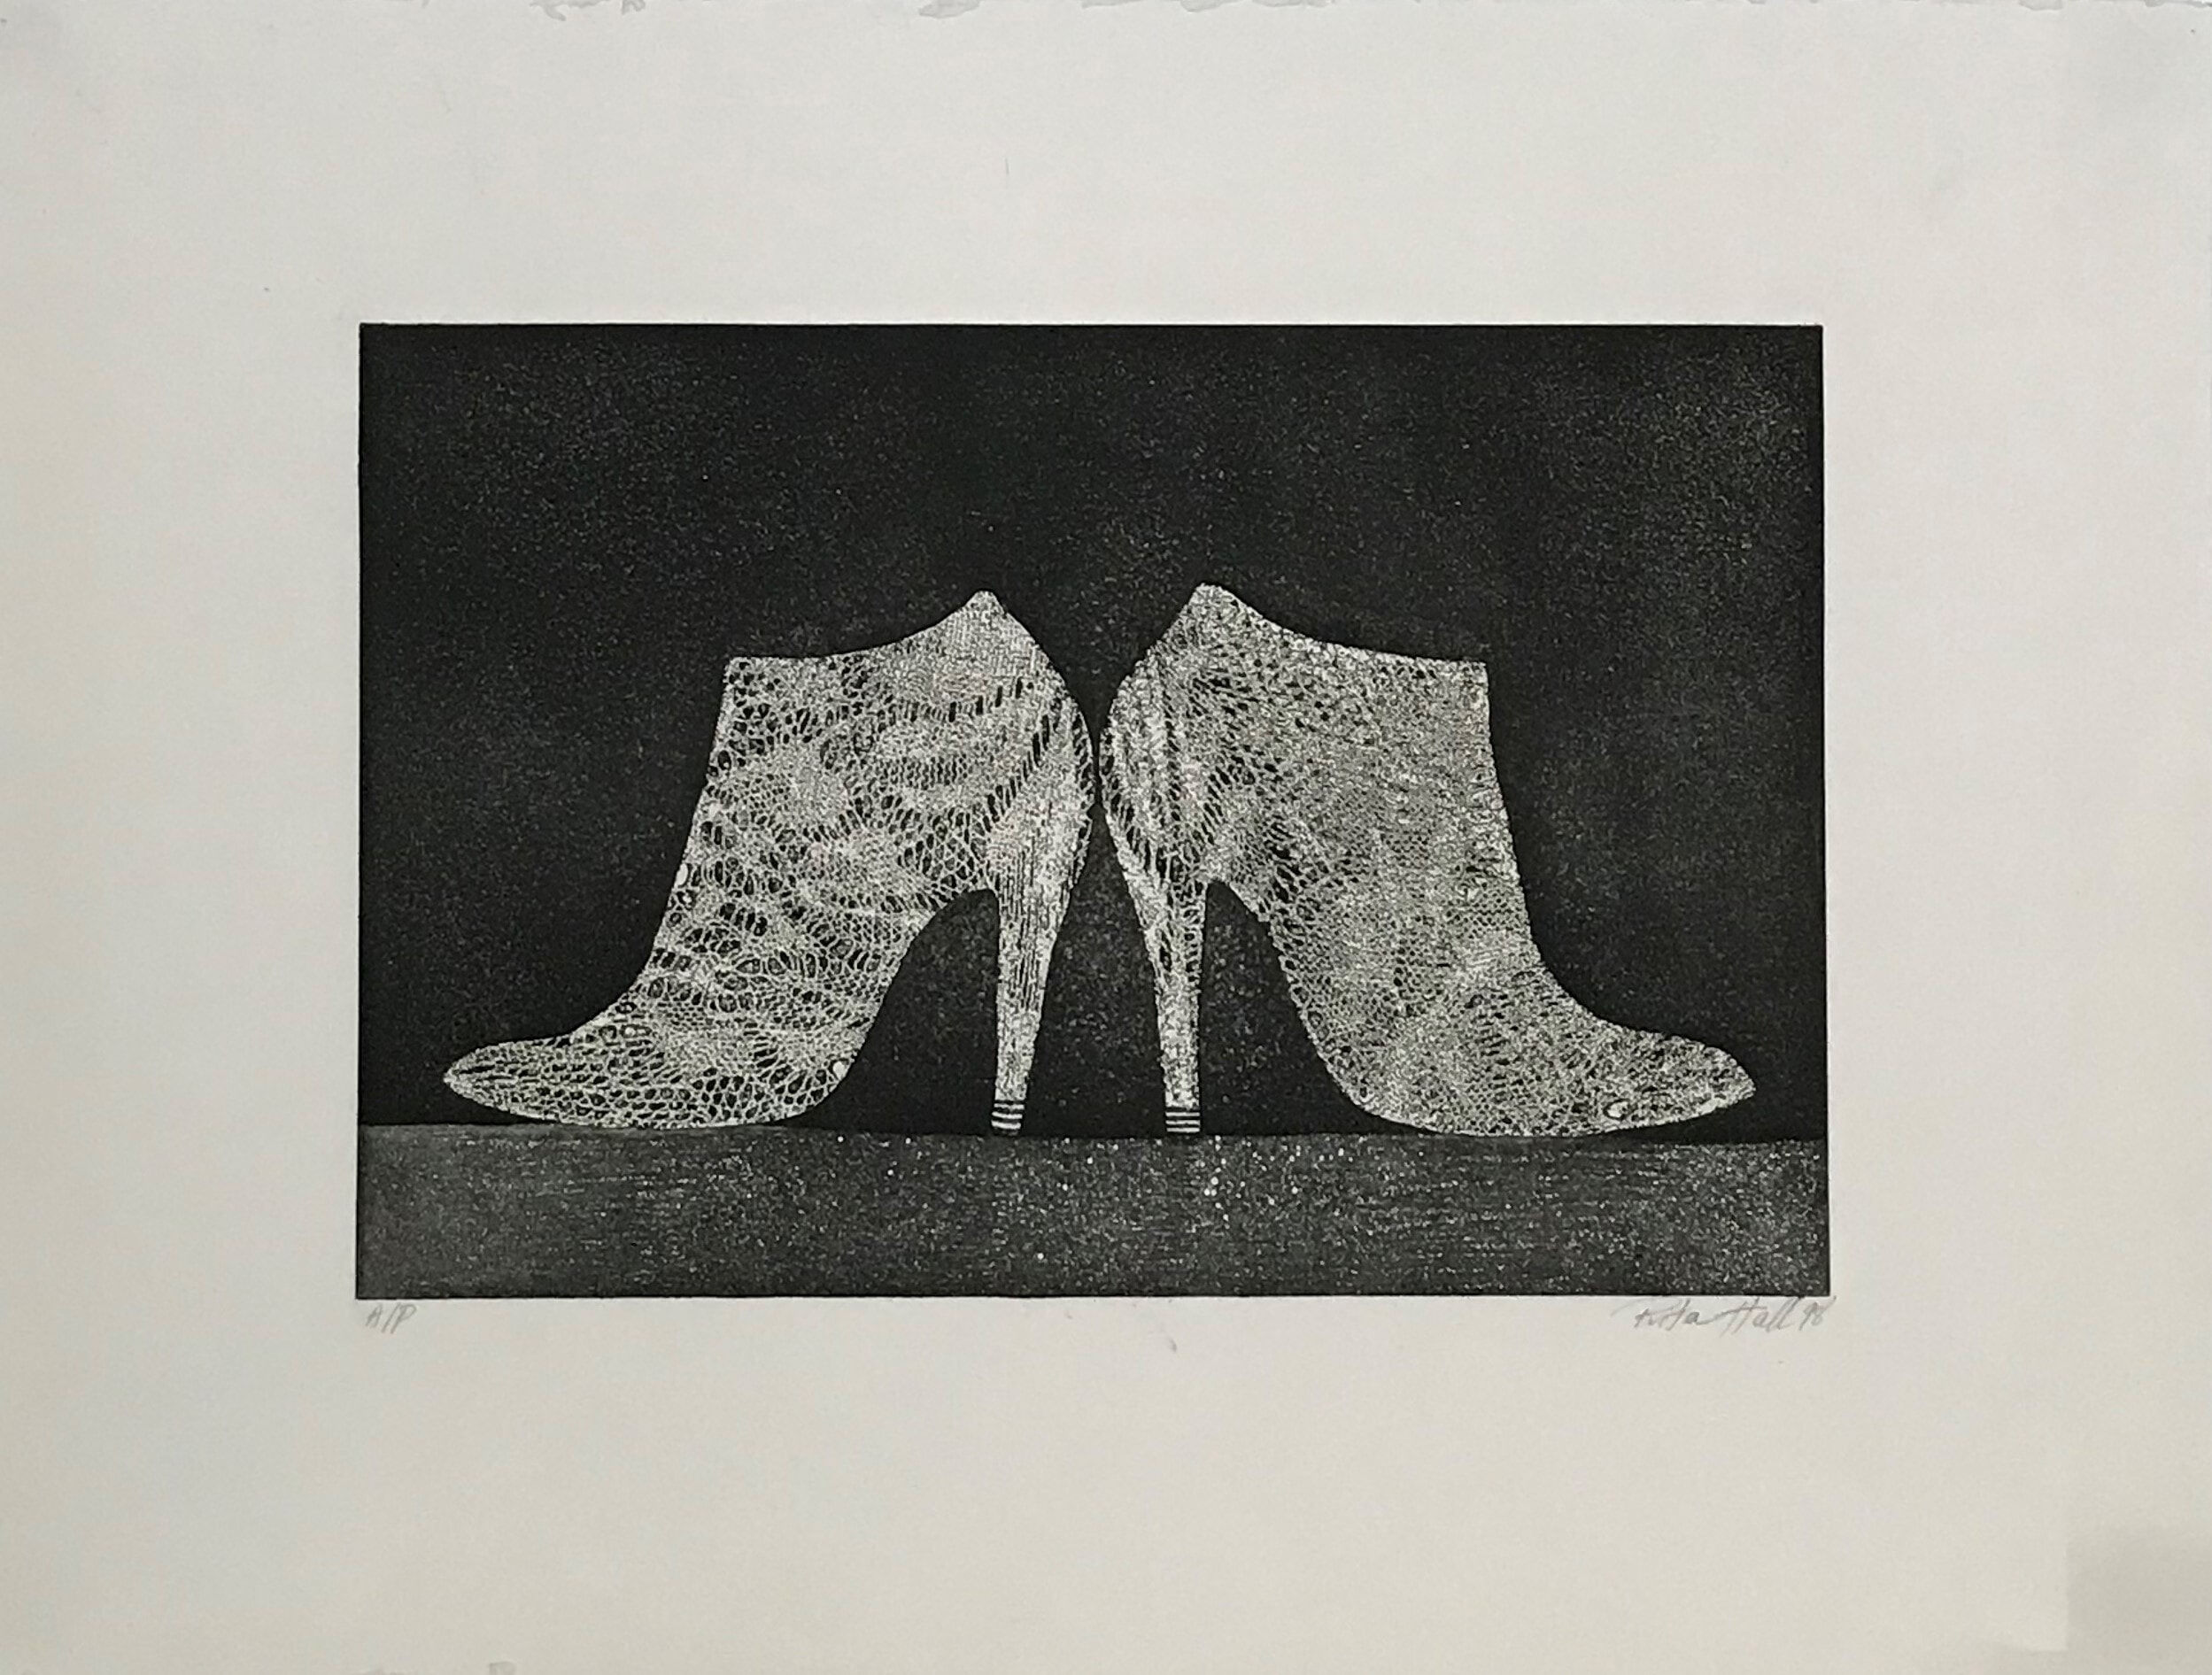 Laced Boots AP 1998 Etching 57 x 76cm